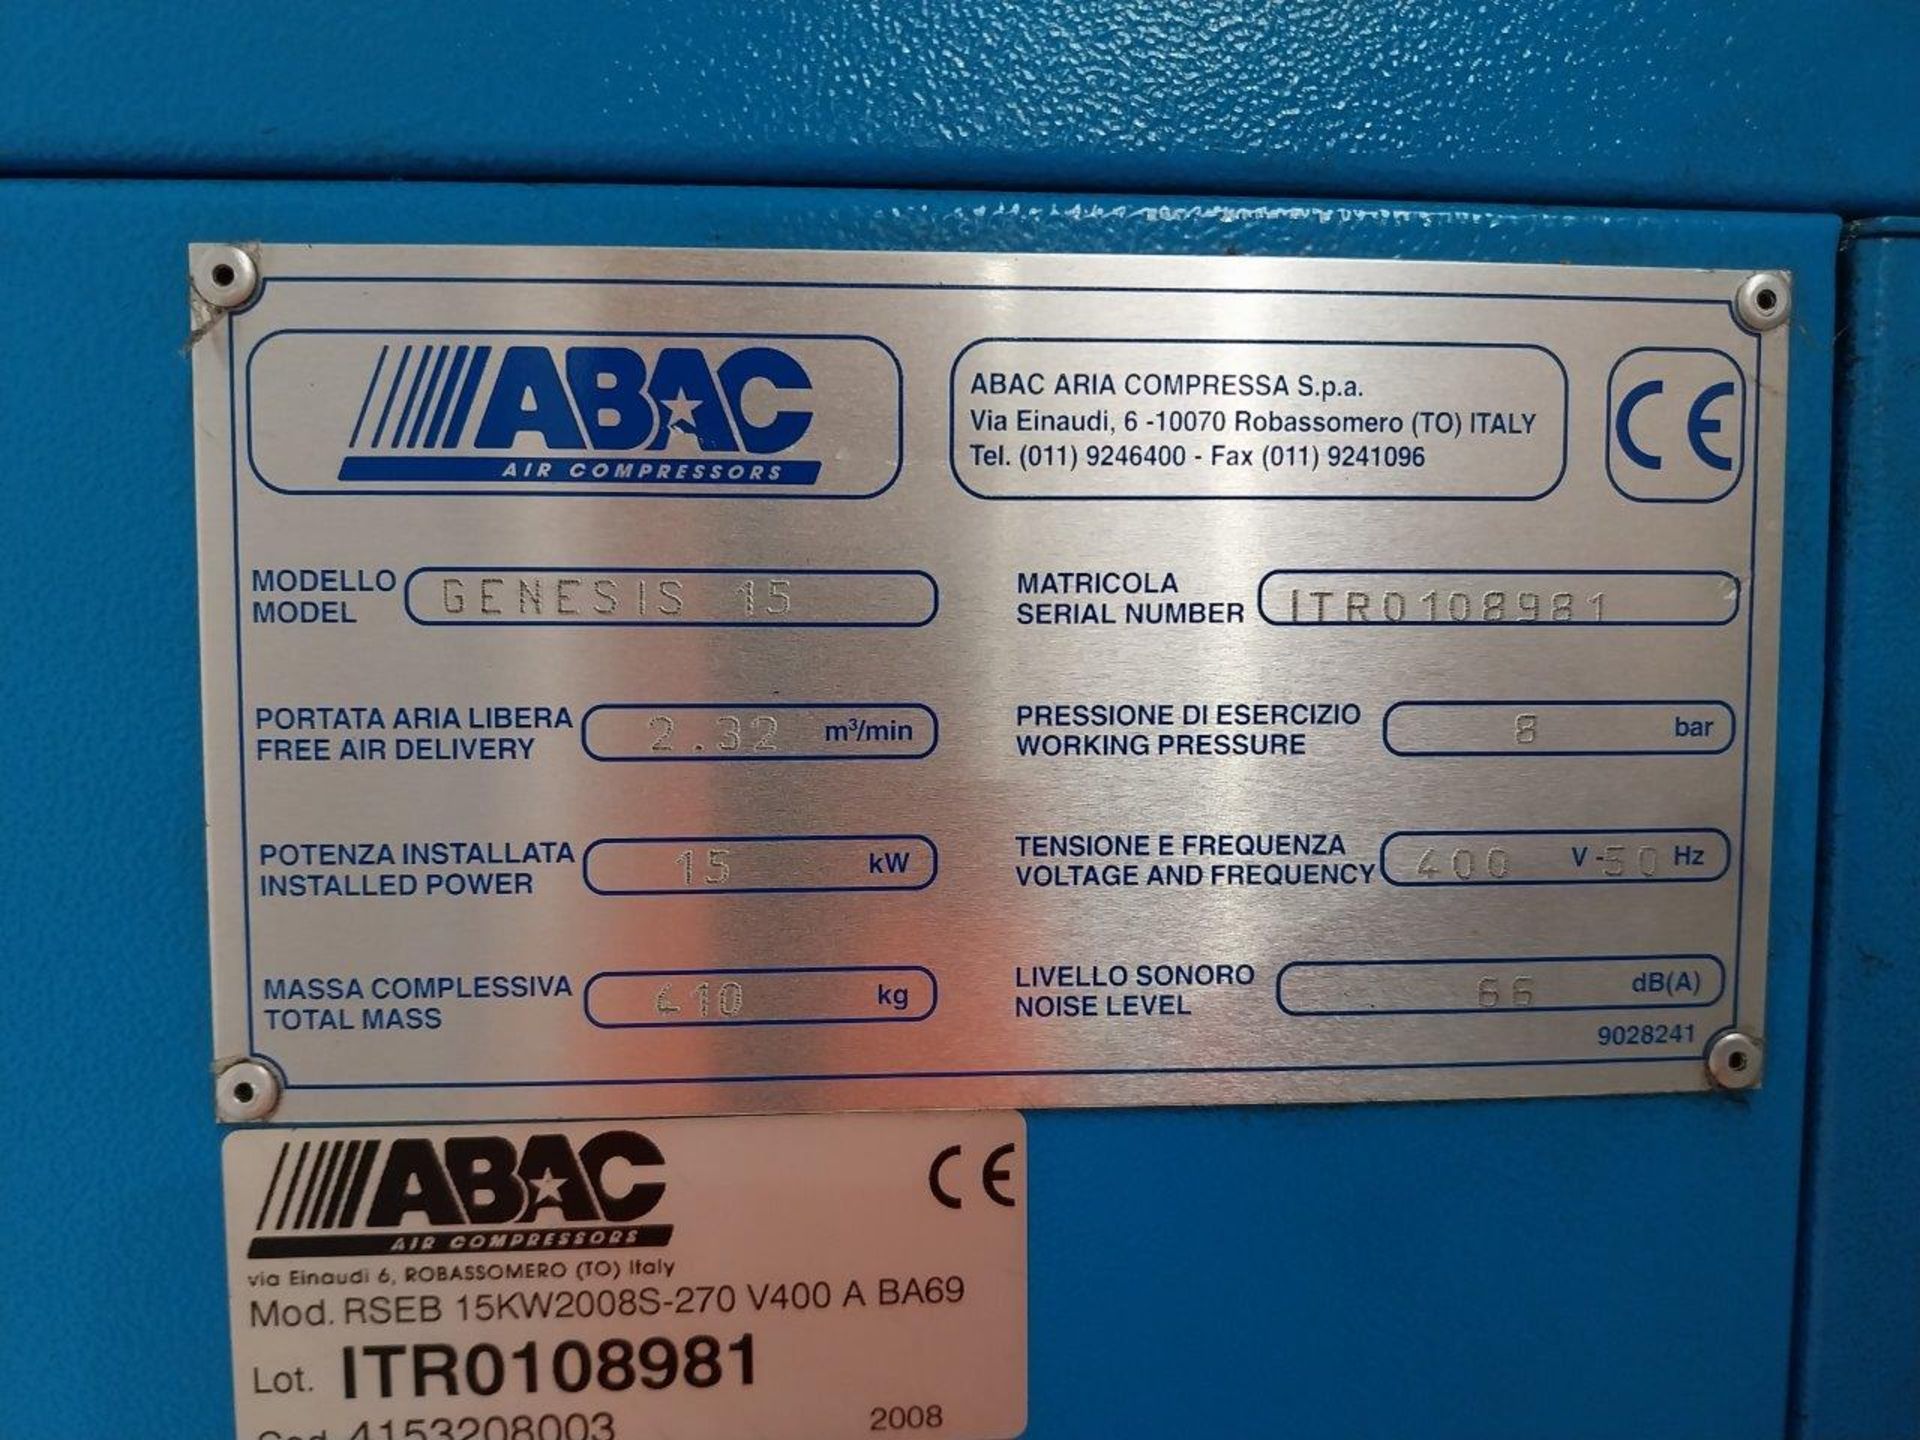 ABAC Genesis 1508 8 bar screw compressor Serial number ITR0108981, free air delivery 2.32m³ / min - Image 4 of 5